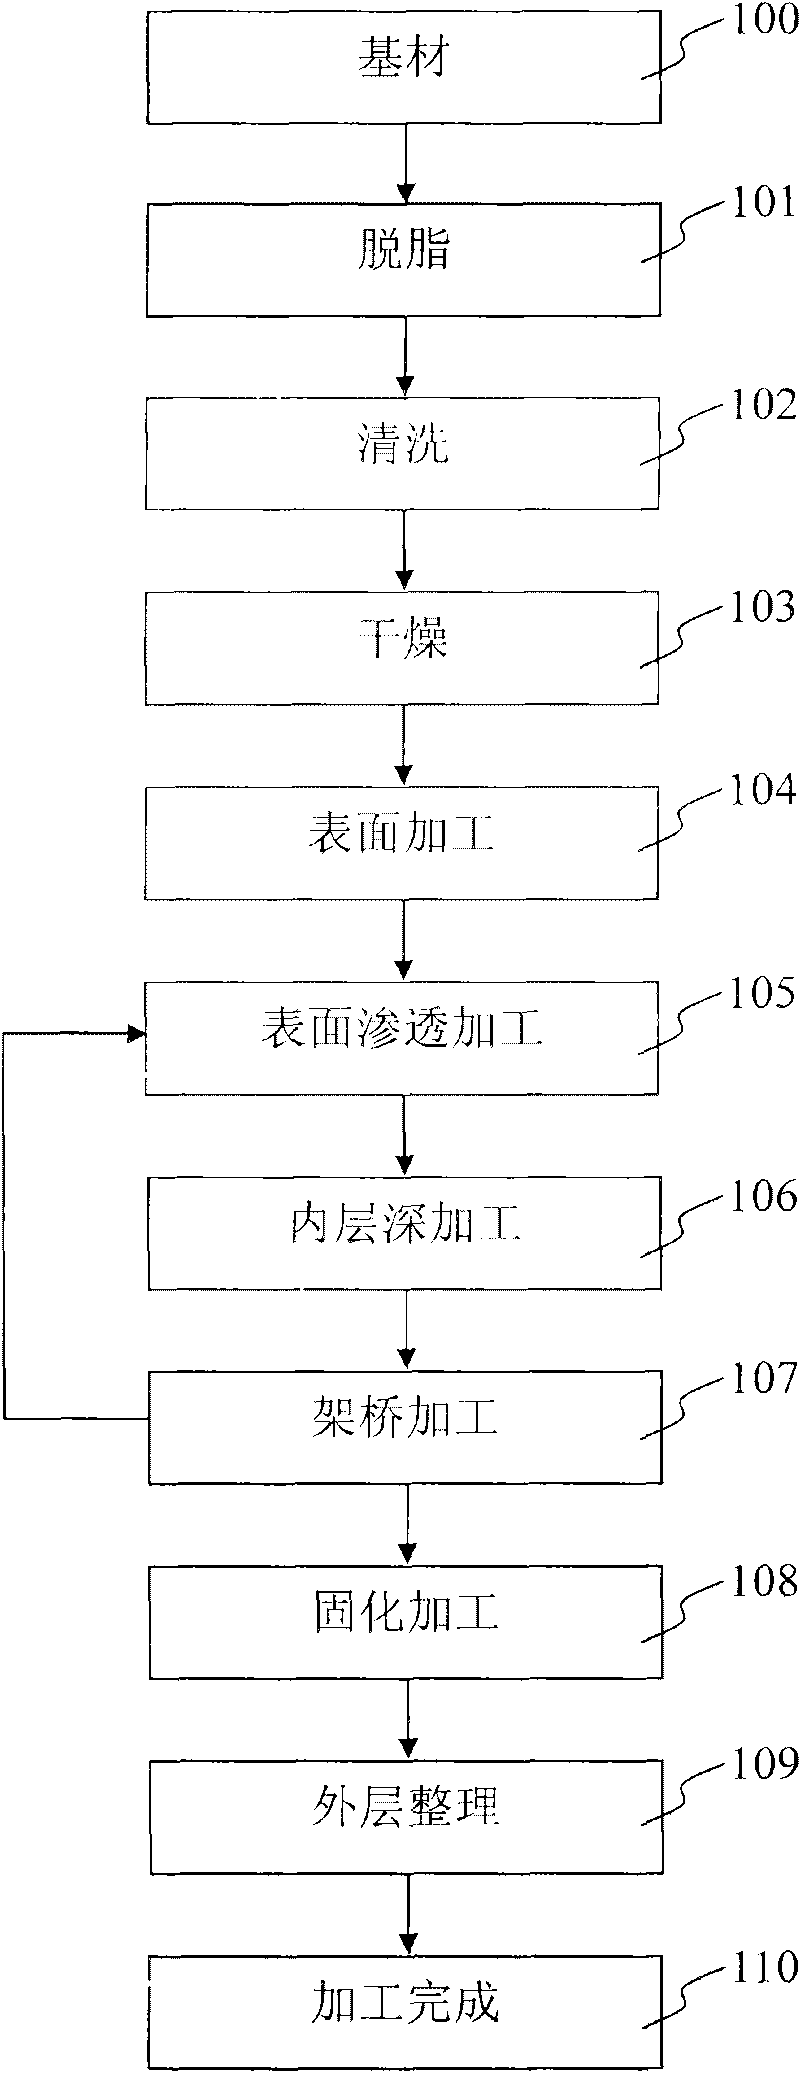 Processing method for surface coating